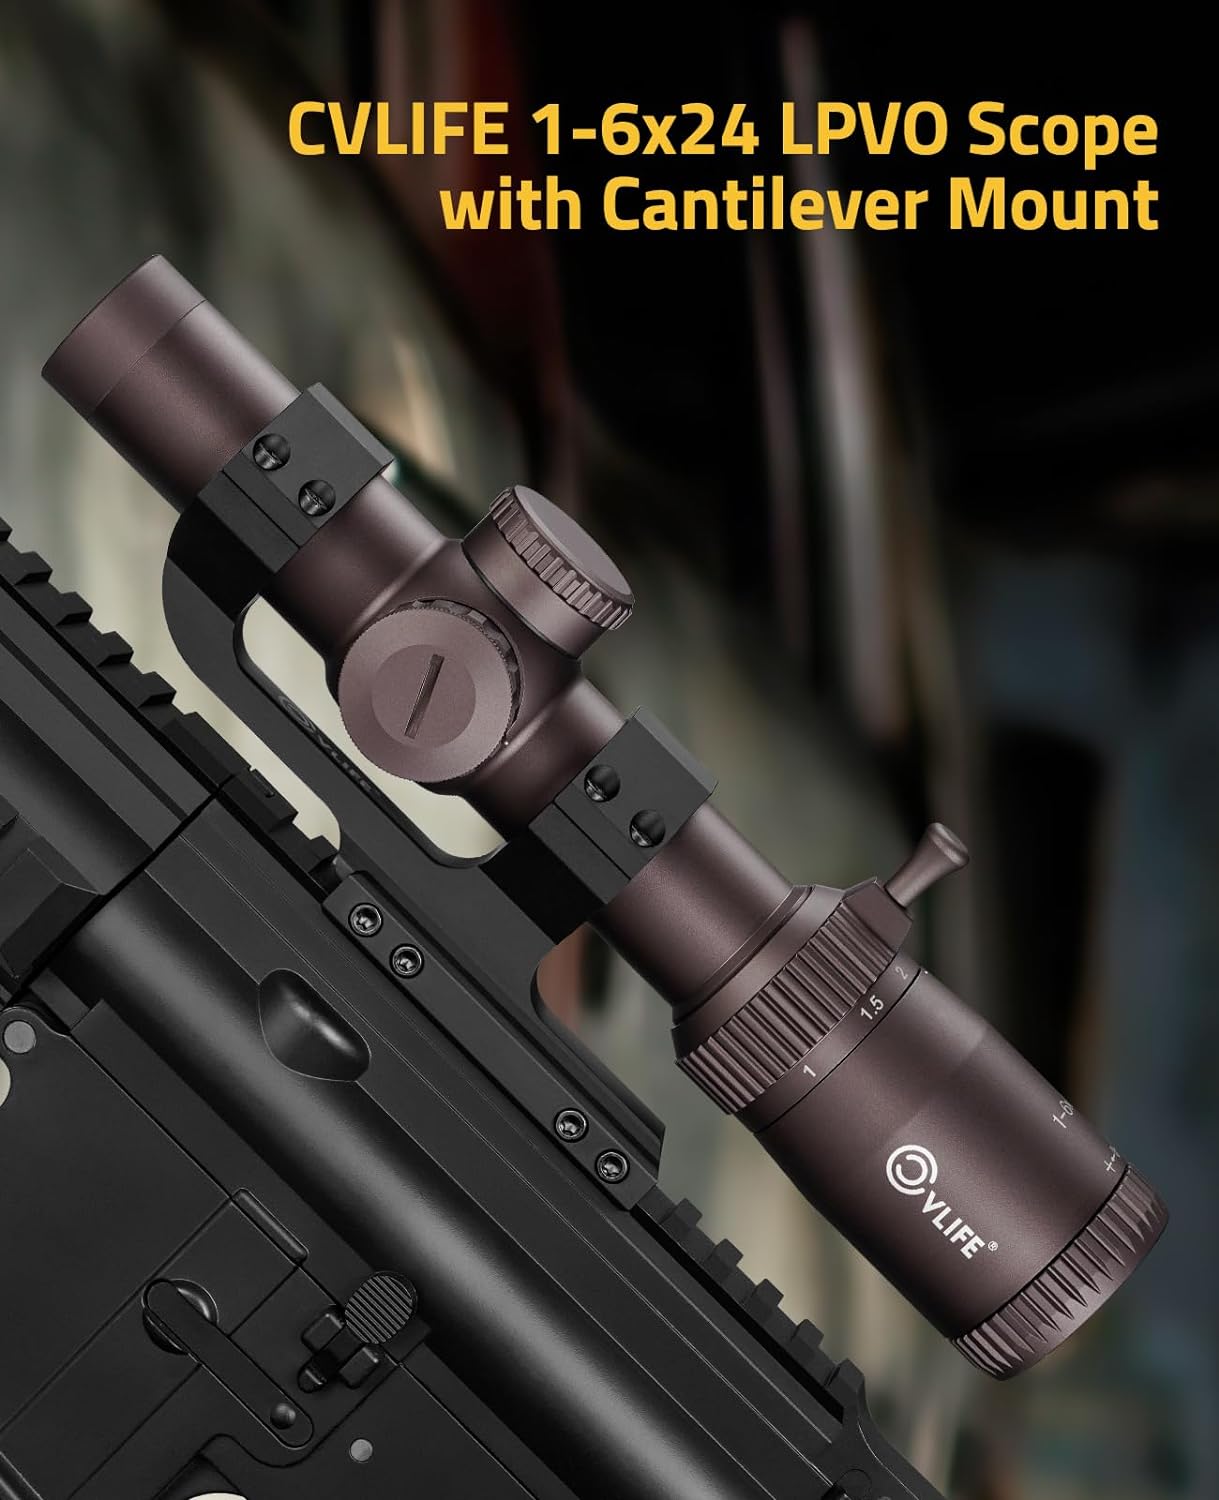 CVLIFE EagleFeather 1-6x24 LPVO Rifle Scope with 30mm Cantilever Mount | 5 Levels Red  Green Illumination Reticle | Second Focal Plane Scopes with Zero Reset - CVLIFE EagleFeather 1-6x24 LPVO Rifle Scope Review